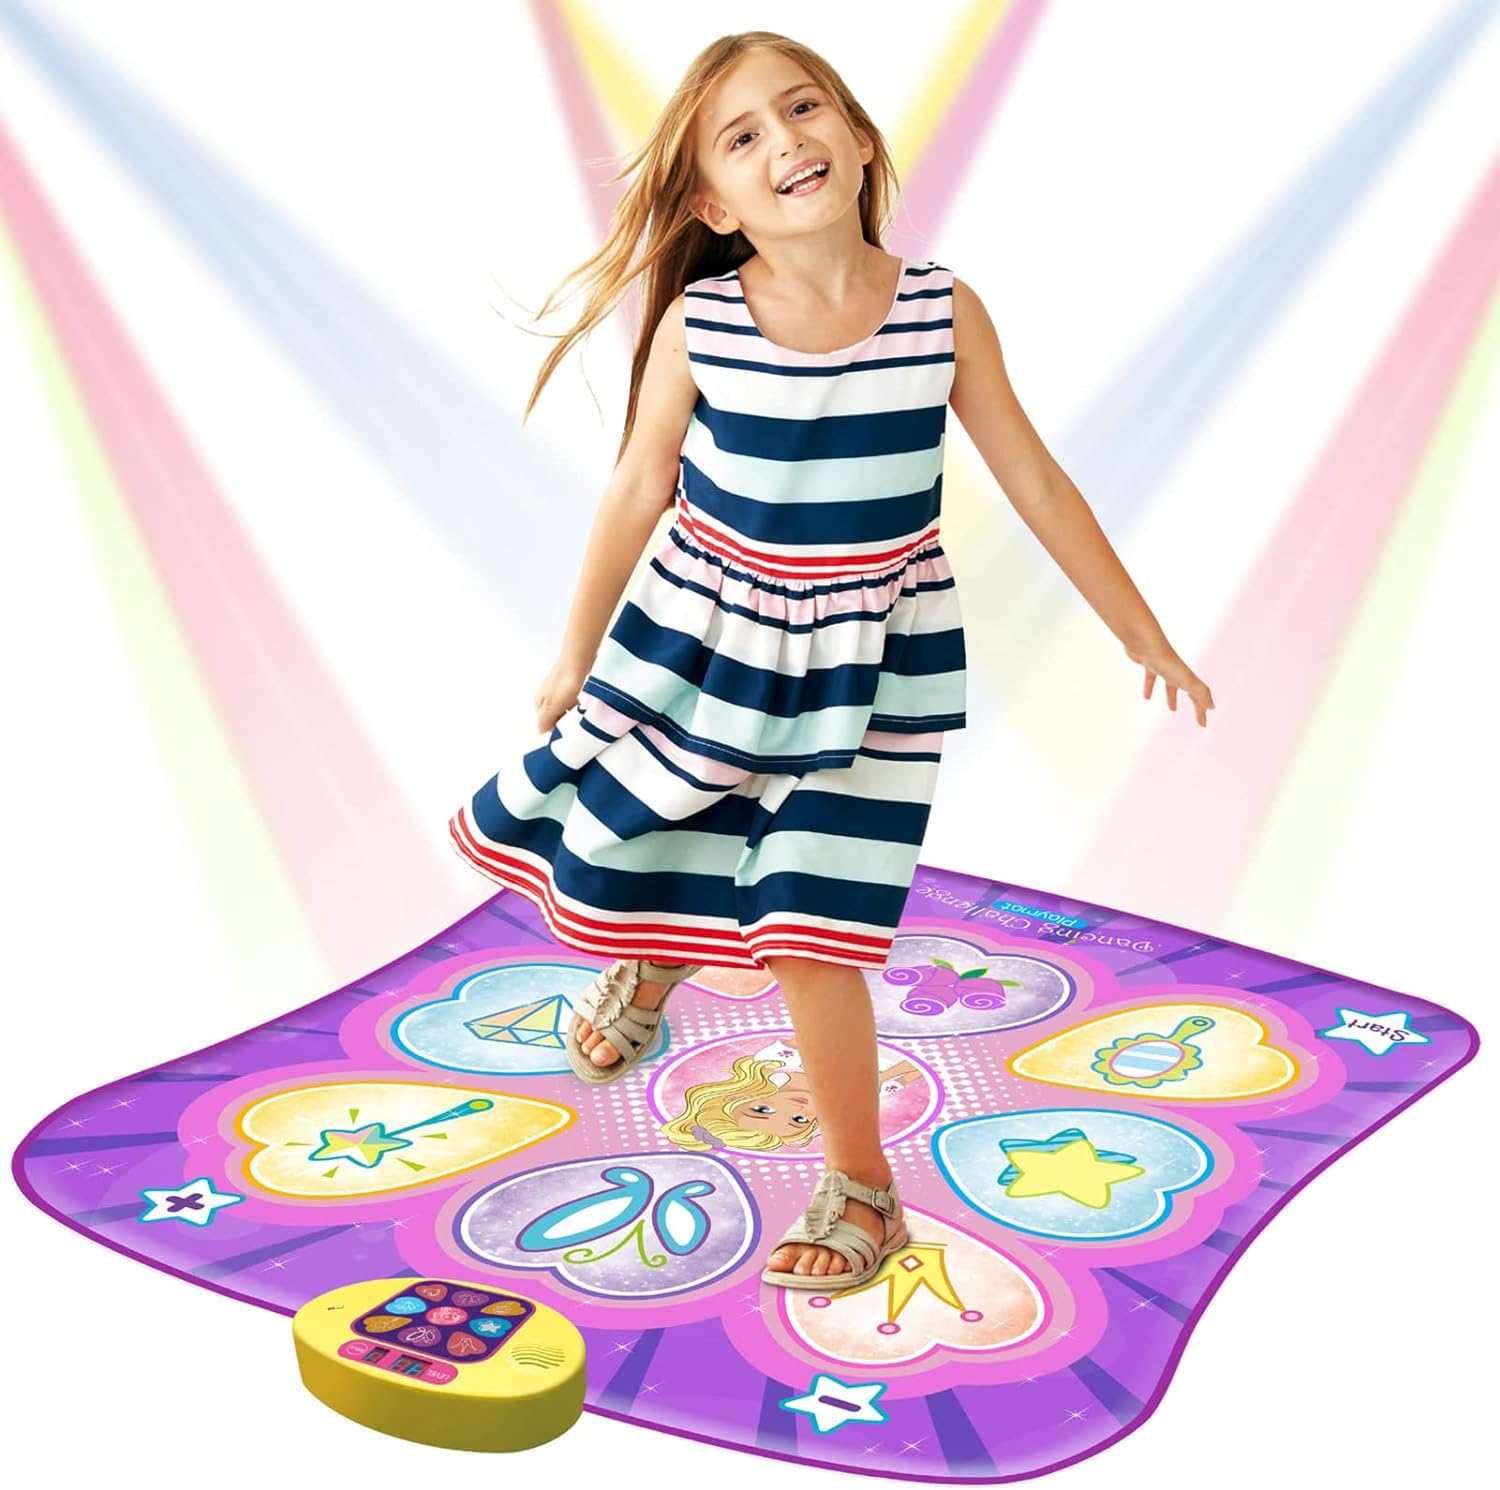 Read more about the article SUNLIN Dance Mat Toys for Girls Ages 3-10 Review